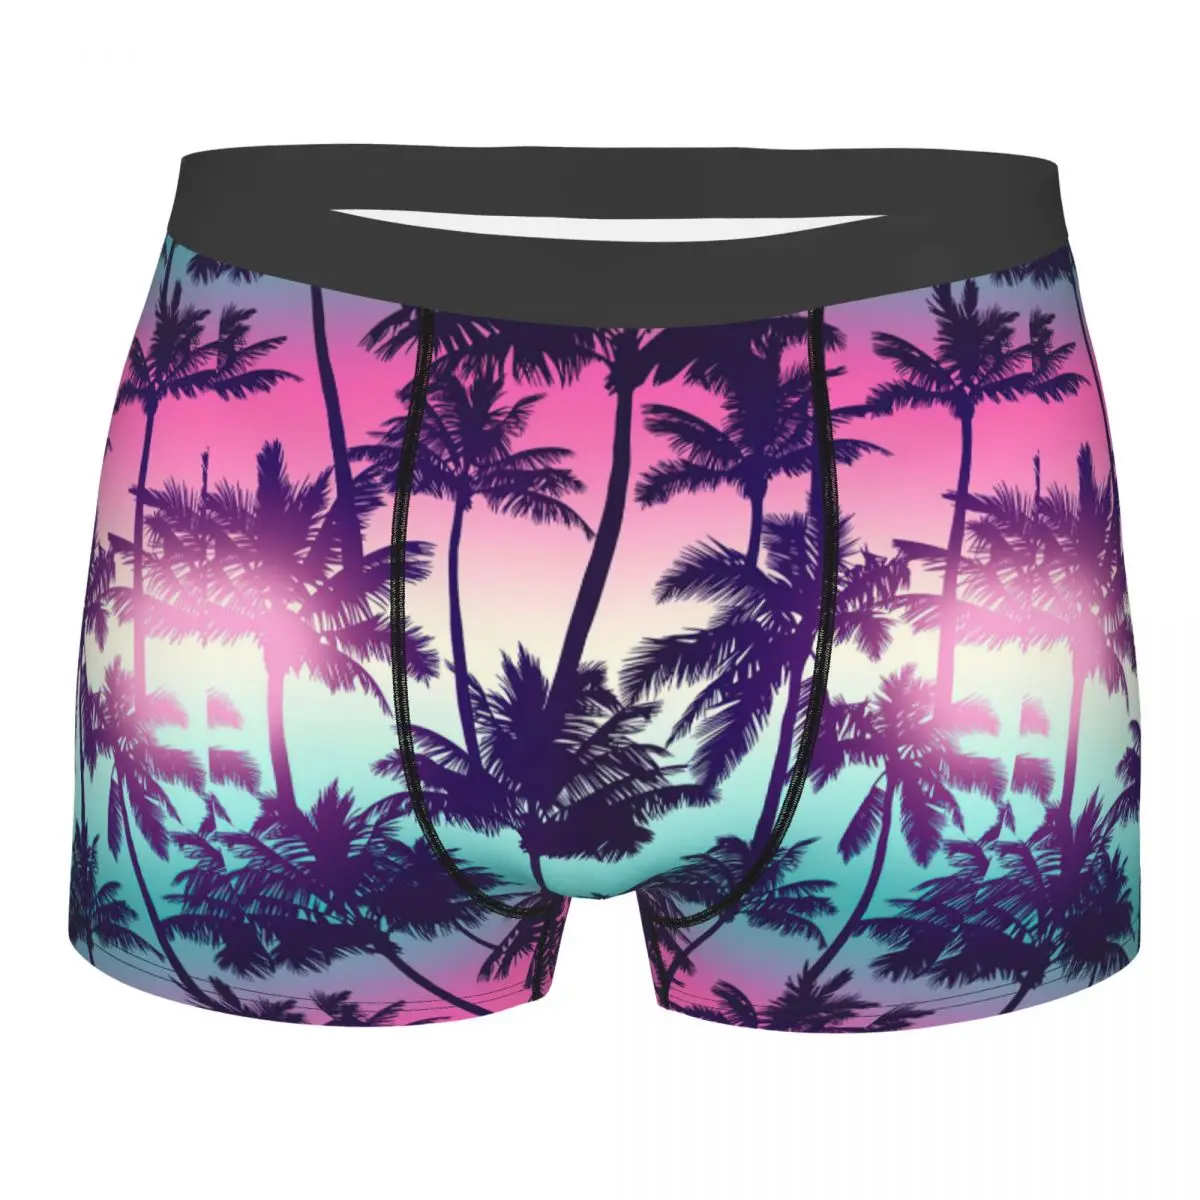 

Men Sunset Palm Fabric By MirabellePrint Underwear Novelty Boxer Briefs Shorts Panties Homme Breathable Underpants S-XXL